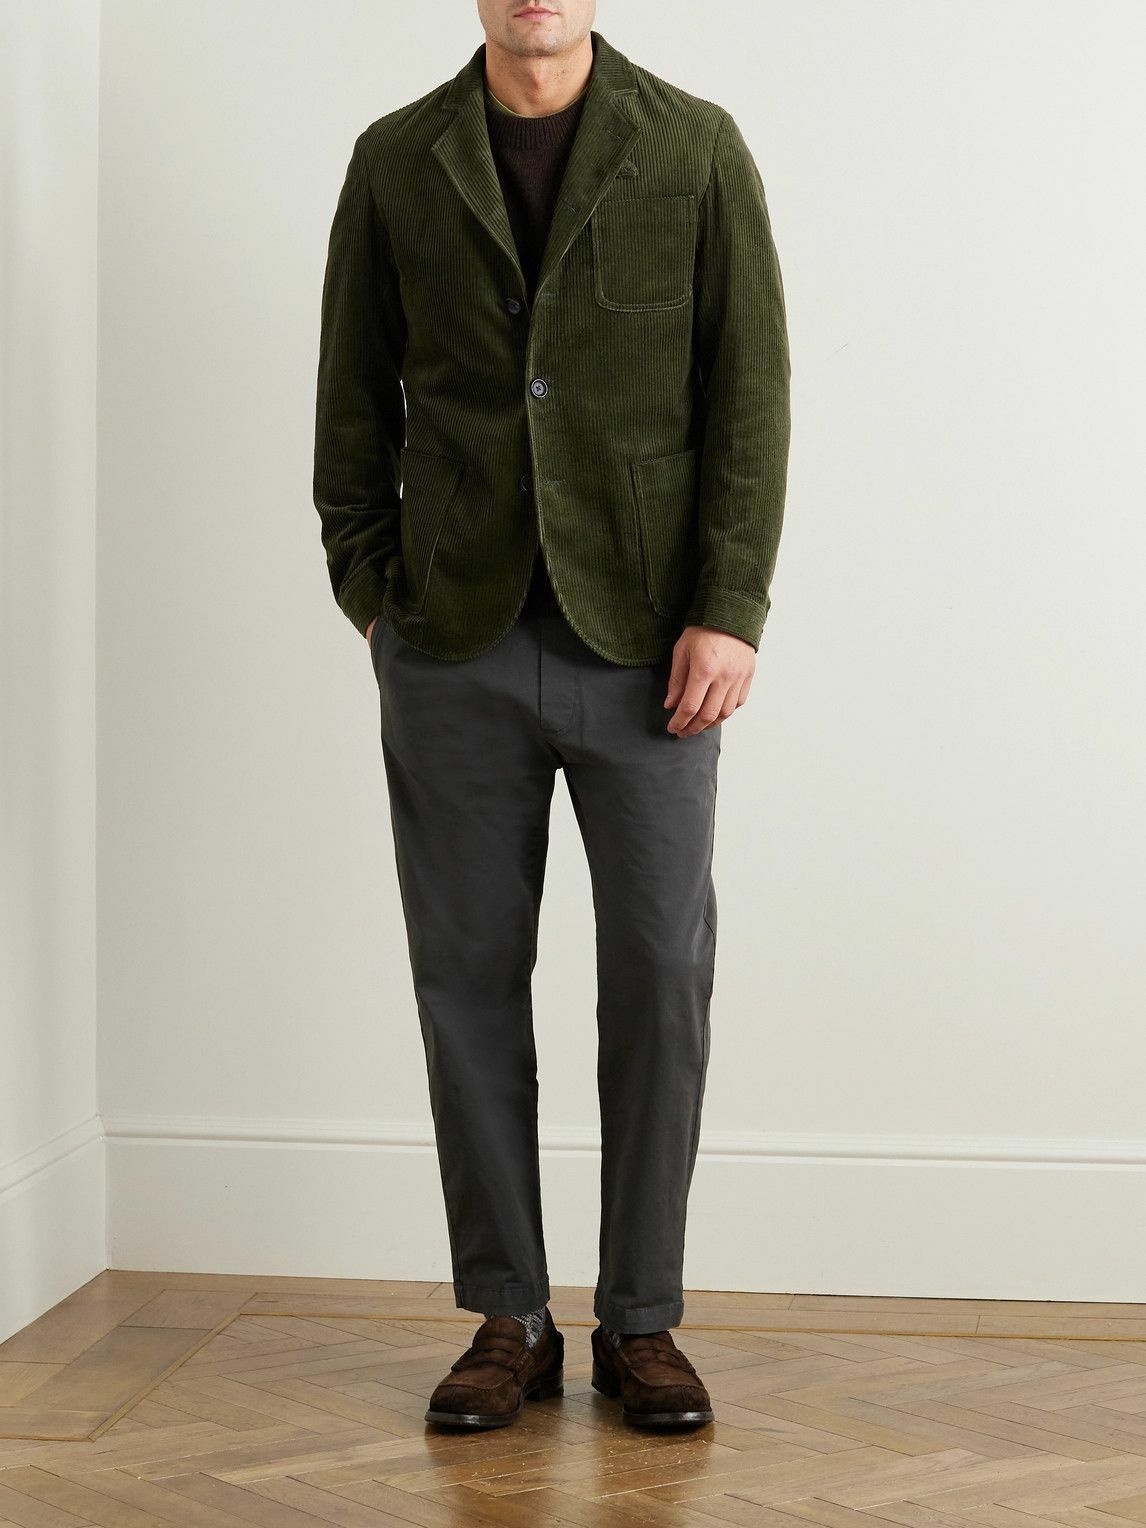 Men's Corduroy Clothing & Accessories – Oliver Spencer